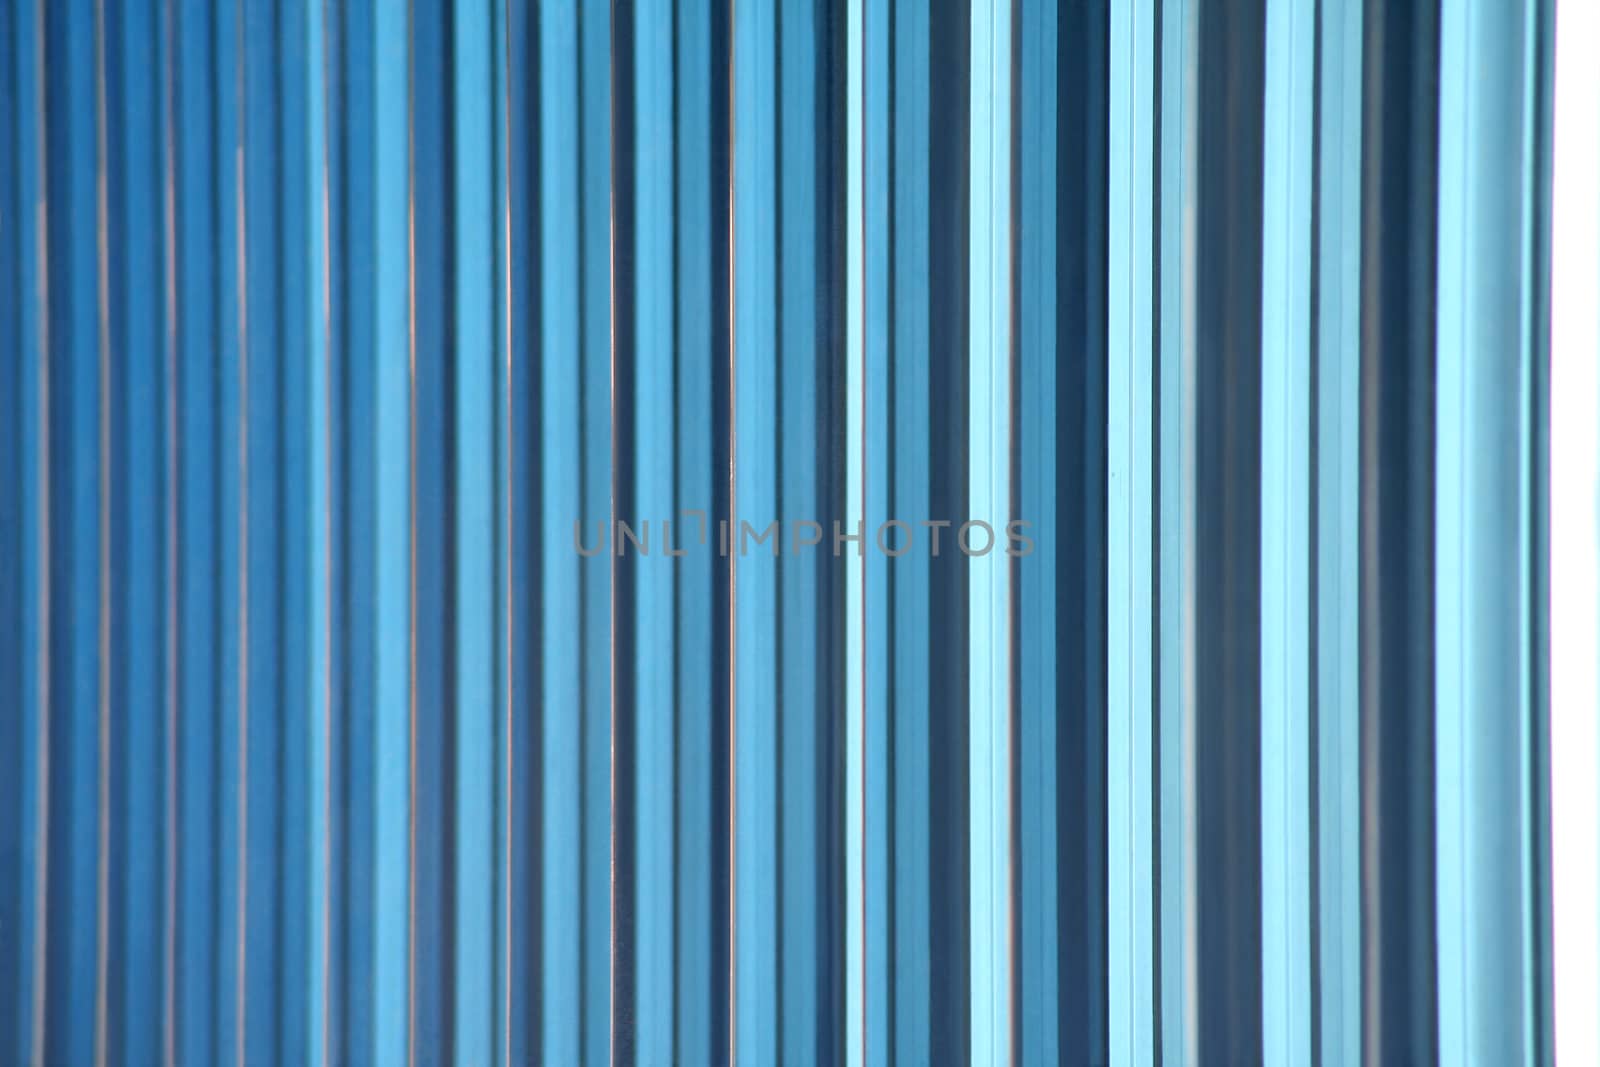 A shot of blue decorative glass tiles partitioning the windows of an office building's facade makes a great gradient background abstract. Horizontal version.